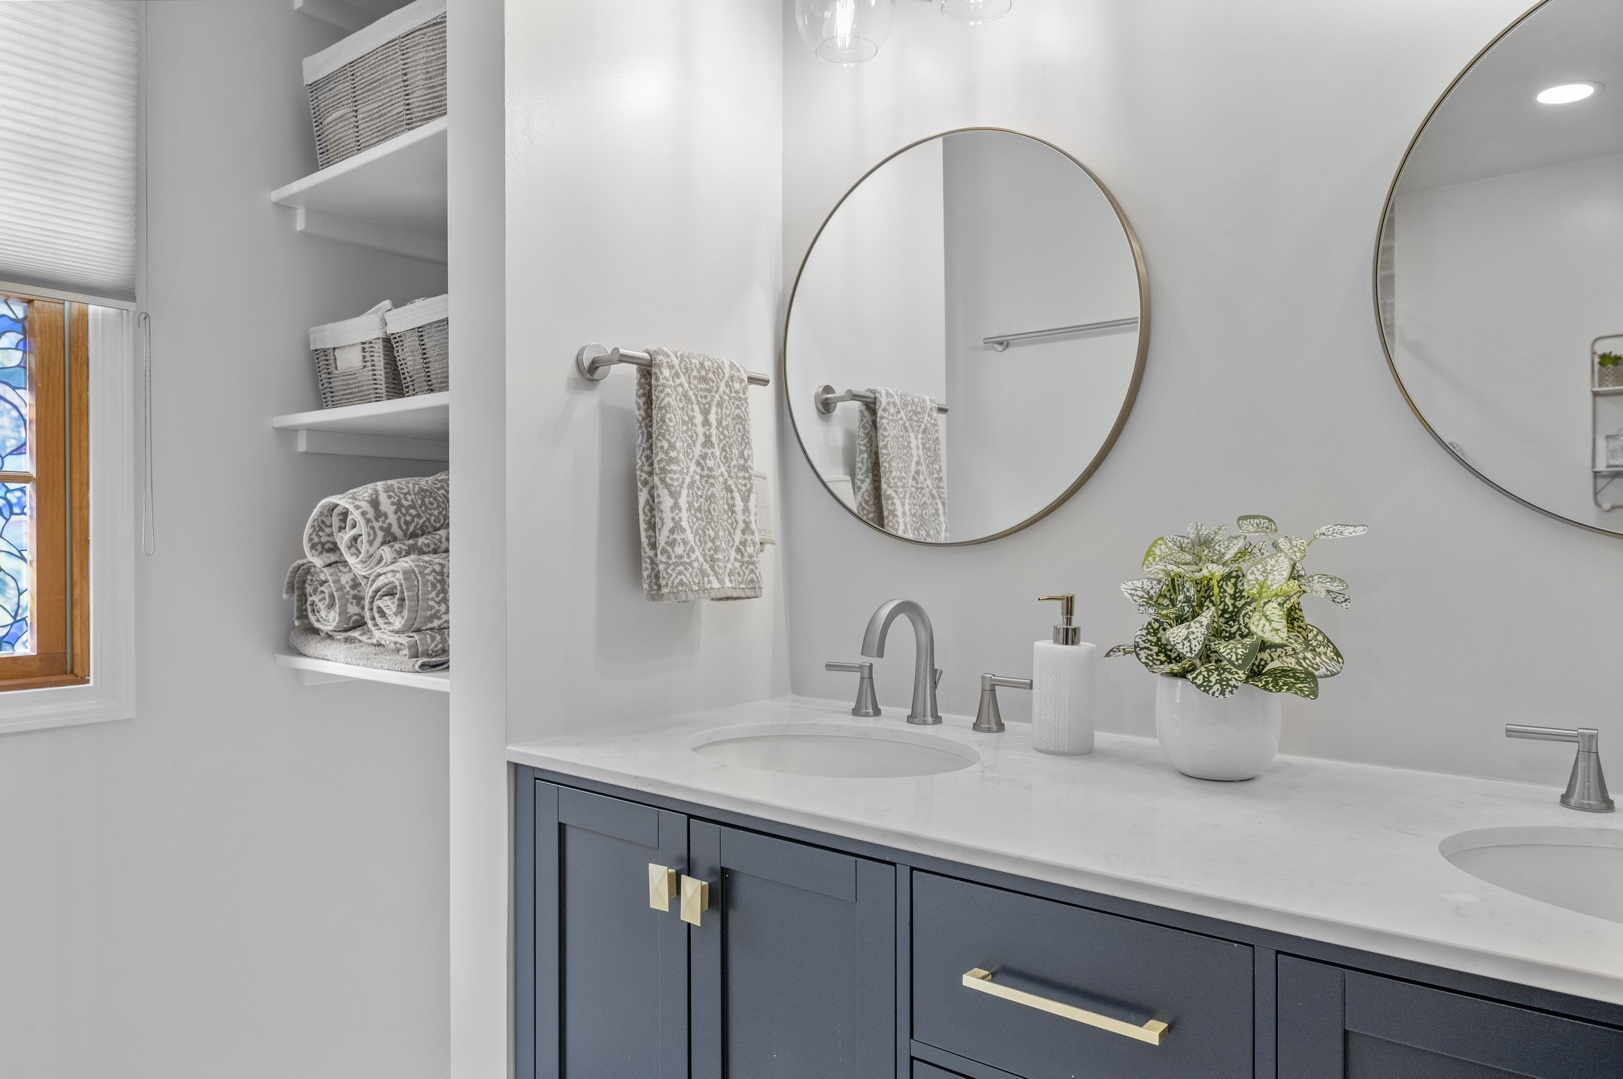 Remodeled bathroom with a double sink navy vanity, two mirrors, two gold light fixtures, chrome accessories, chrome faucets, closet with open shelving, and large floor tiles